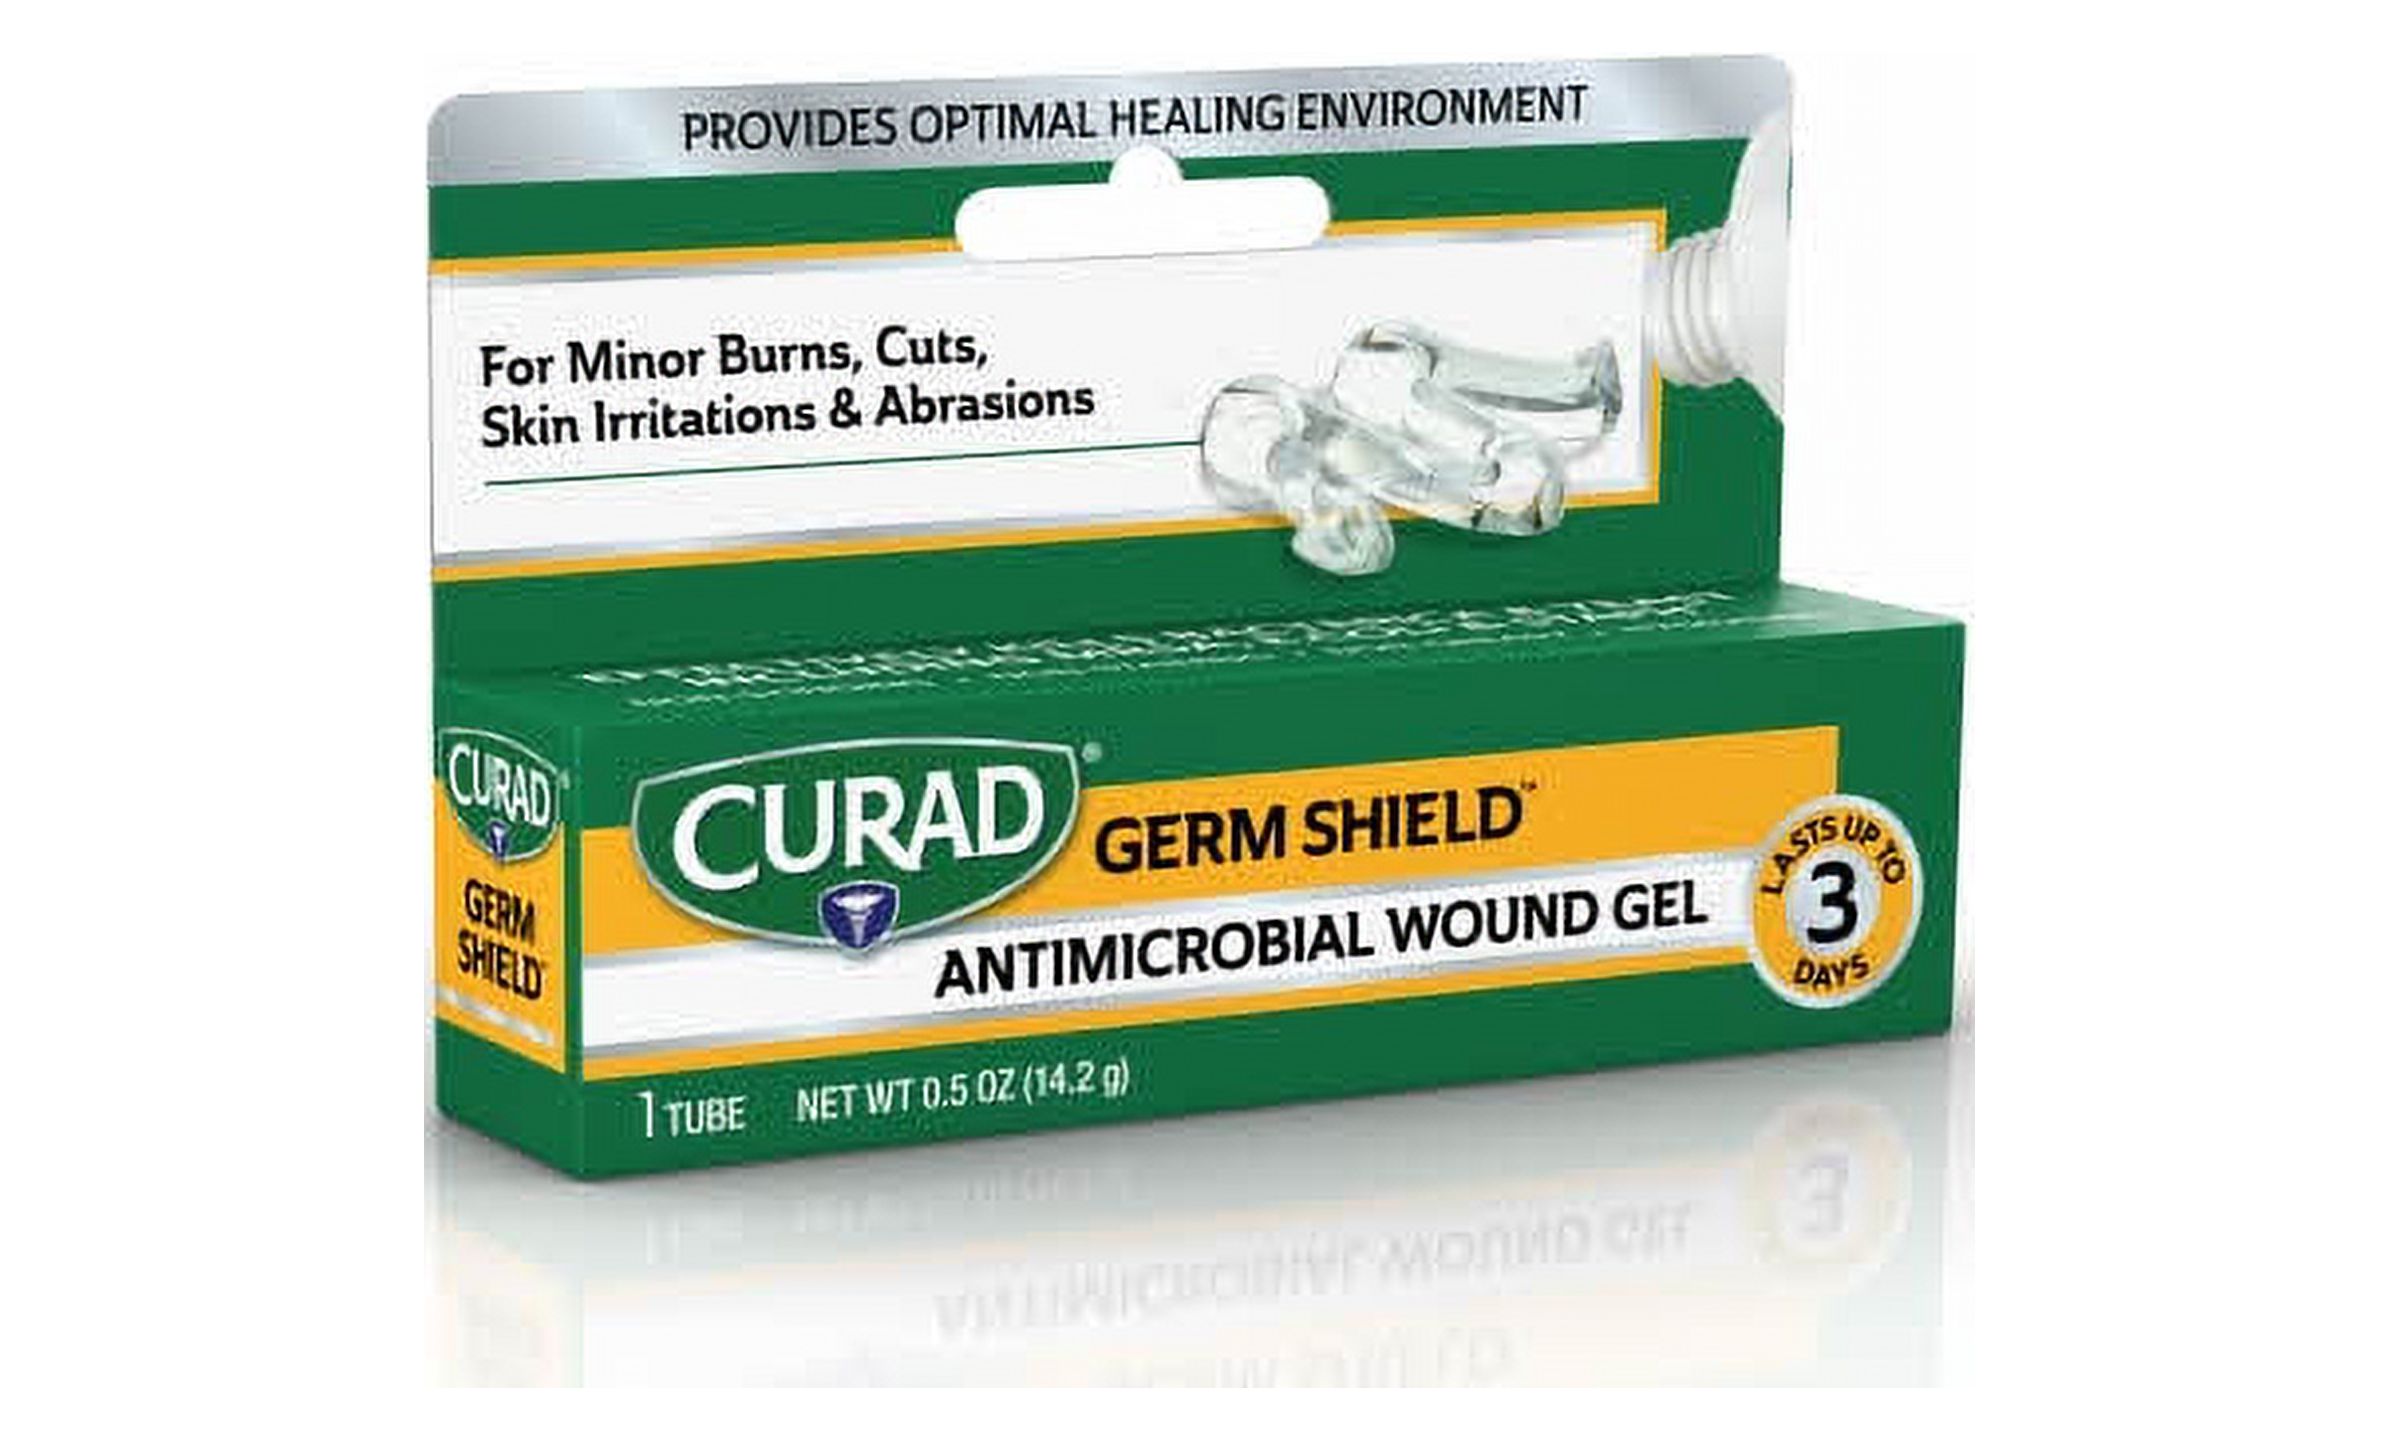 Curad Germ Shield Antimicrobial Silver Wound Gel, For Minor Cuts, Scrapes and Burns, 0.5 Oz Tube, 1 Count - image 5 of 5